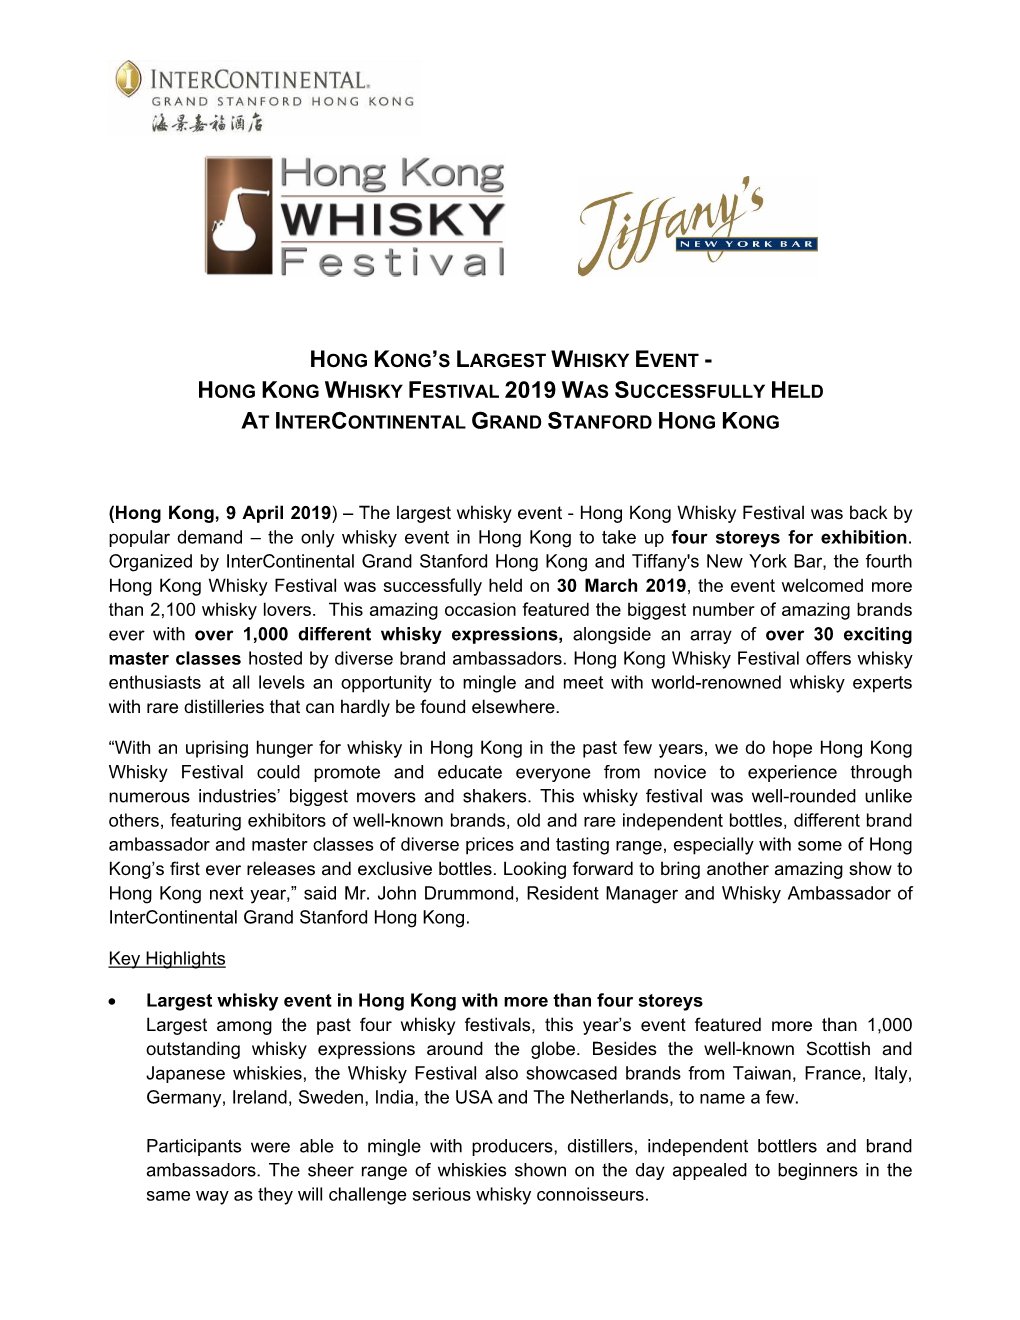 Hong Kong's Largest Whisky Event